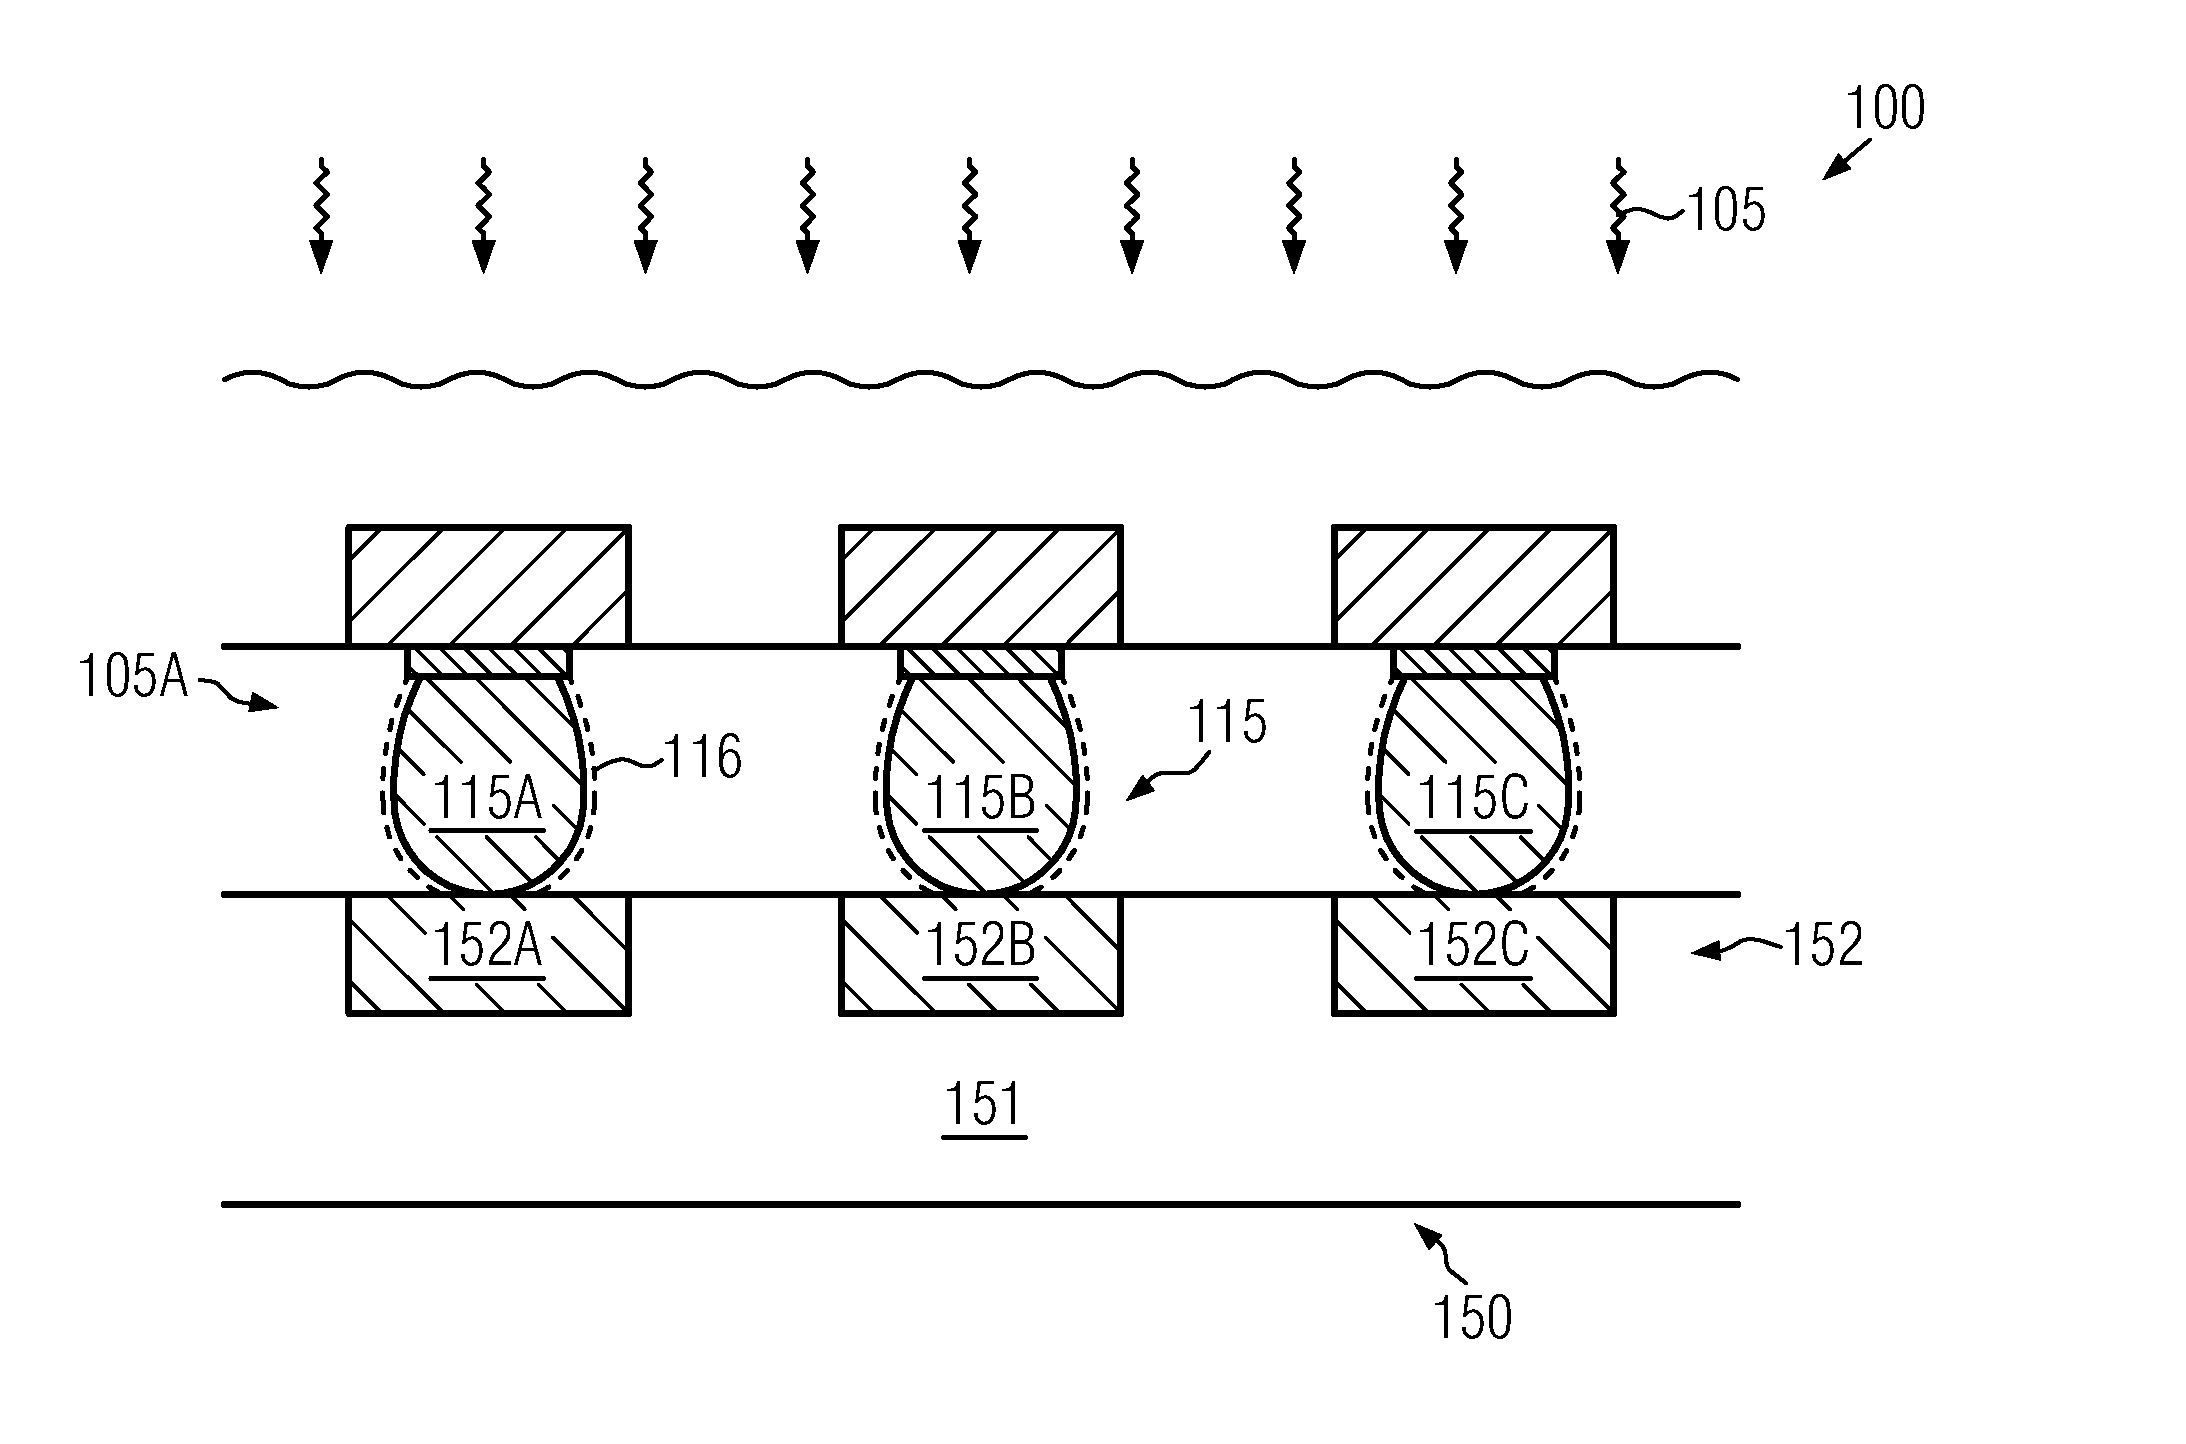 Method for Forming Lead-Free Solder Balls with a Stable Oxide Layer Based on a Plasma Process